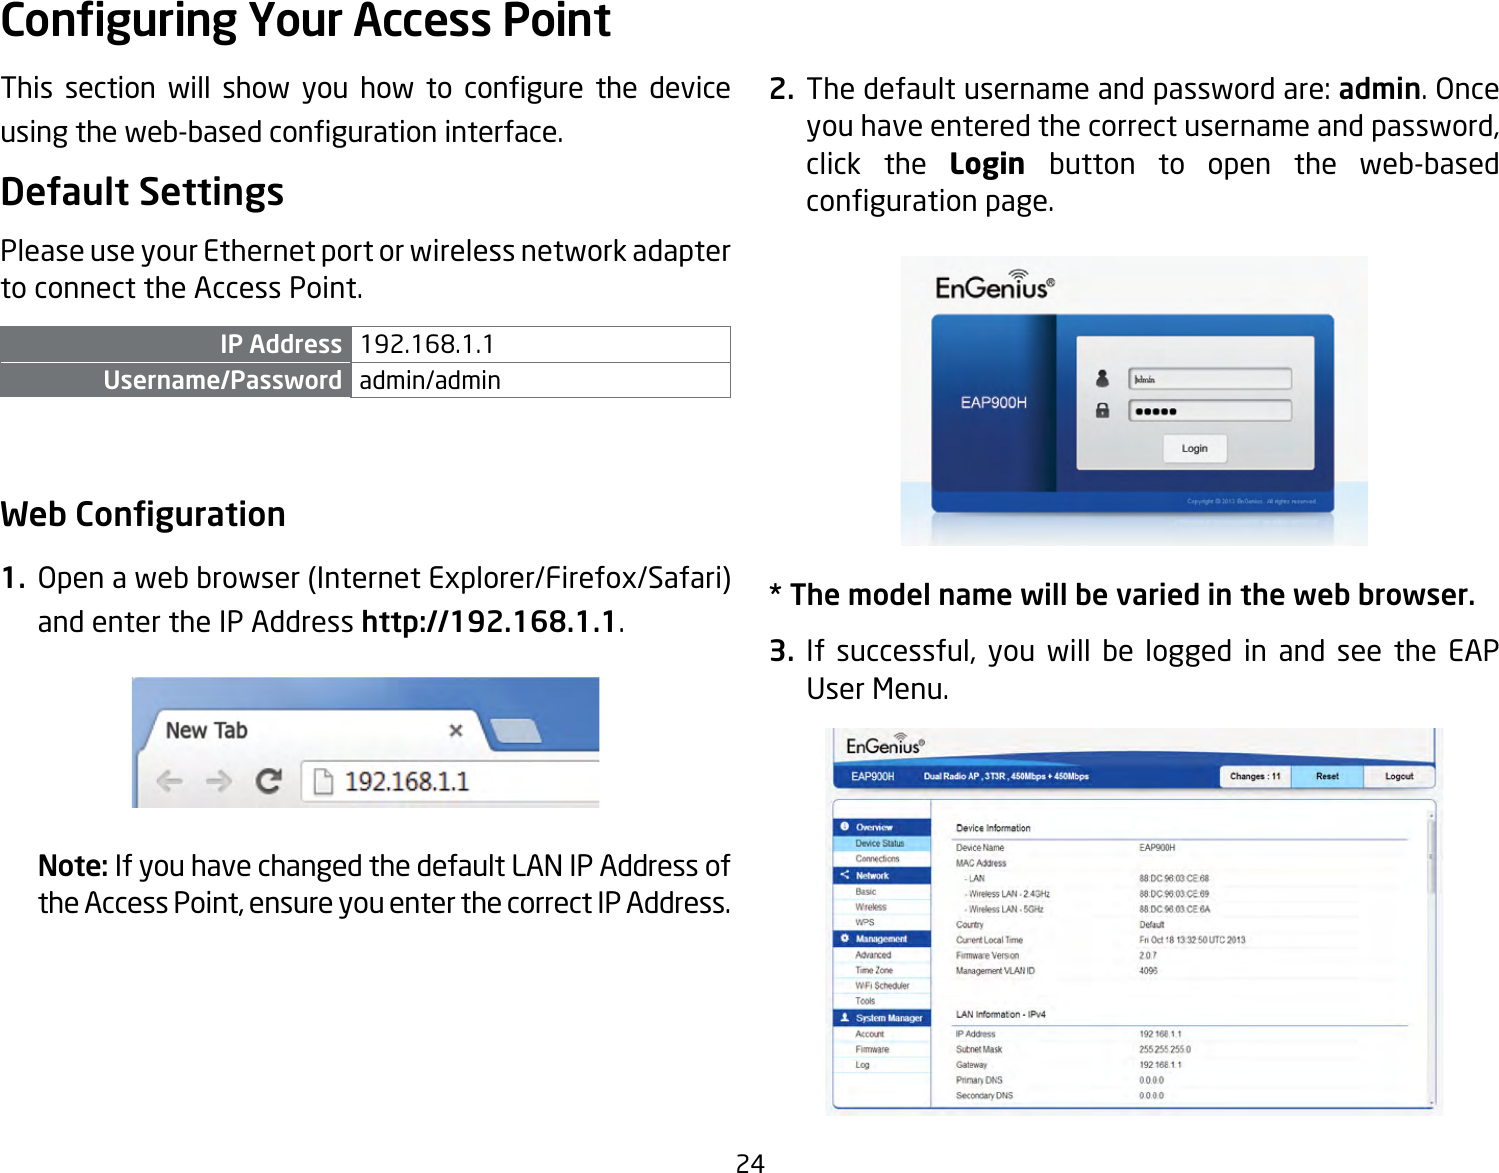 24This section will show you how to congure the deviceusingtheweb-basedcongurationinterface.Default SettingsPlease use your Ethernet port or wireless network adapter to connect the Access Point.IP Address 192.168.1.1Username/Password admin/admin Web Conguration1.  Openawebbrowser(InternetExplorer/Firefox/Safari)and enter the IP Address http://192.168.1.1.Note: If you have changed the default LAN IP Address of theAccessPoint,ensureyouenterthecorrectIPAddress.2. Thedefaultusernameandpasswordare:admin. Once youhaveenteredthecorrectusernameandpassword,click the Login  button to open the web-based congurationpage.* The model name will be varied in the web browser.3. If successful, you will be logged in and see the EAPUser Menu.Conguring Your Access Point